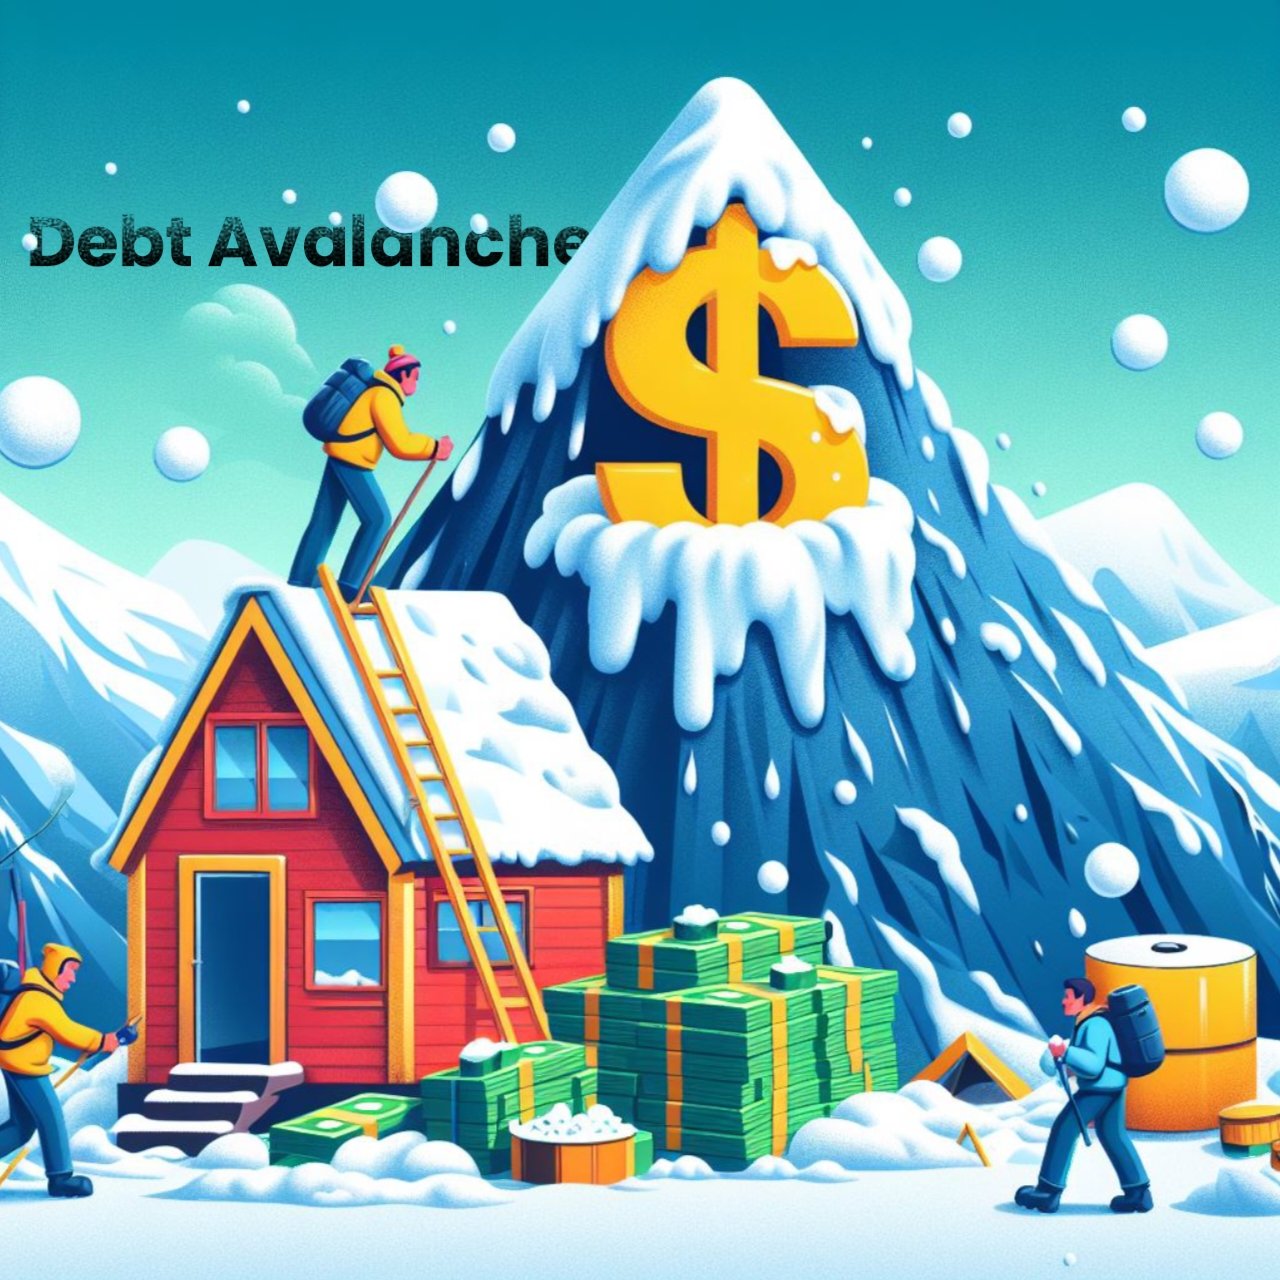 "Debt Avalanche" was titled in parralax effect and a debtor building a base camp near a debt avalanche that has a dollar sign and snowball falling in cartoon animation style